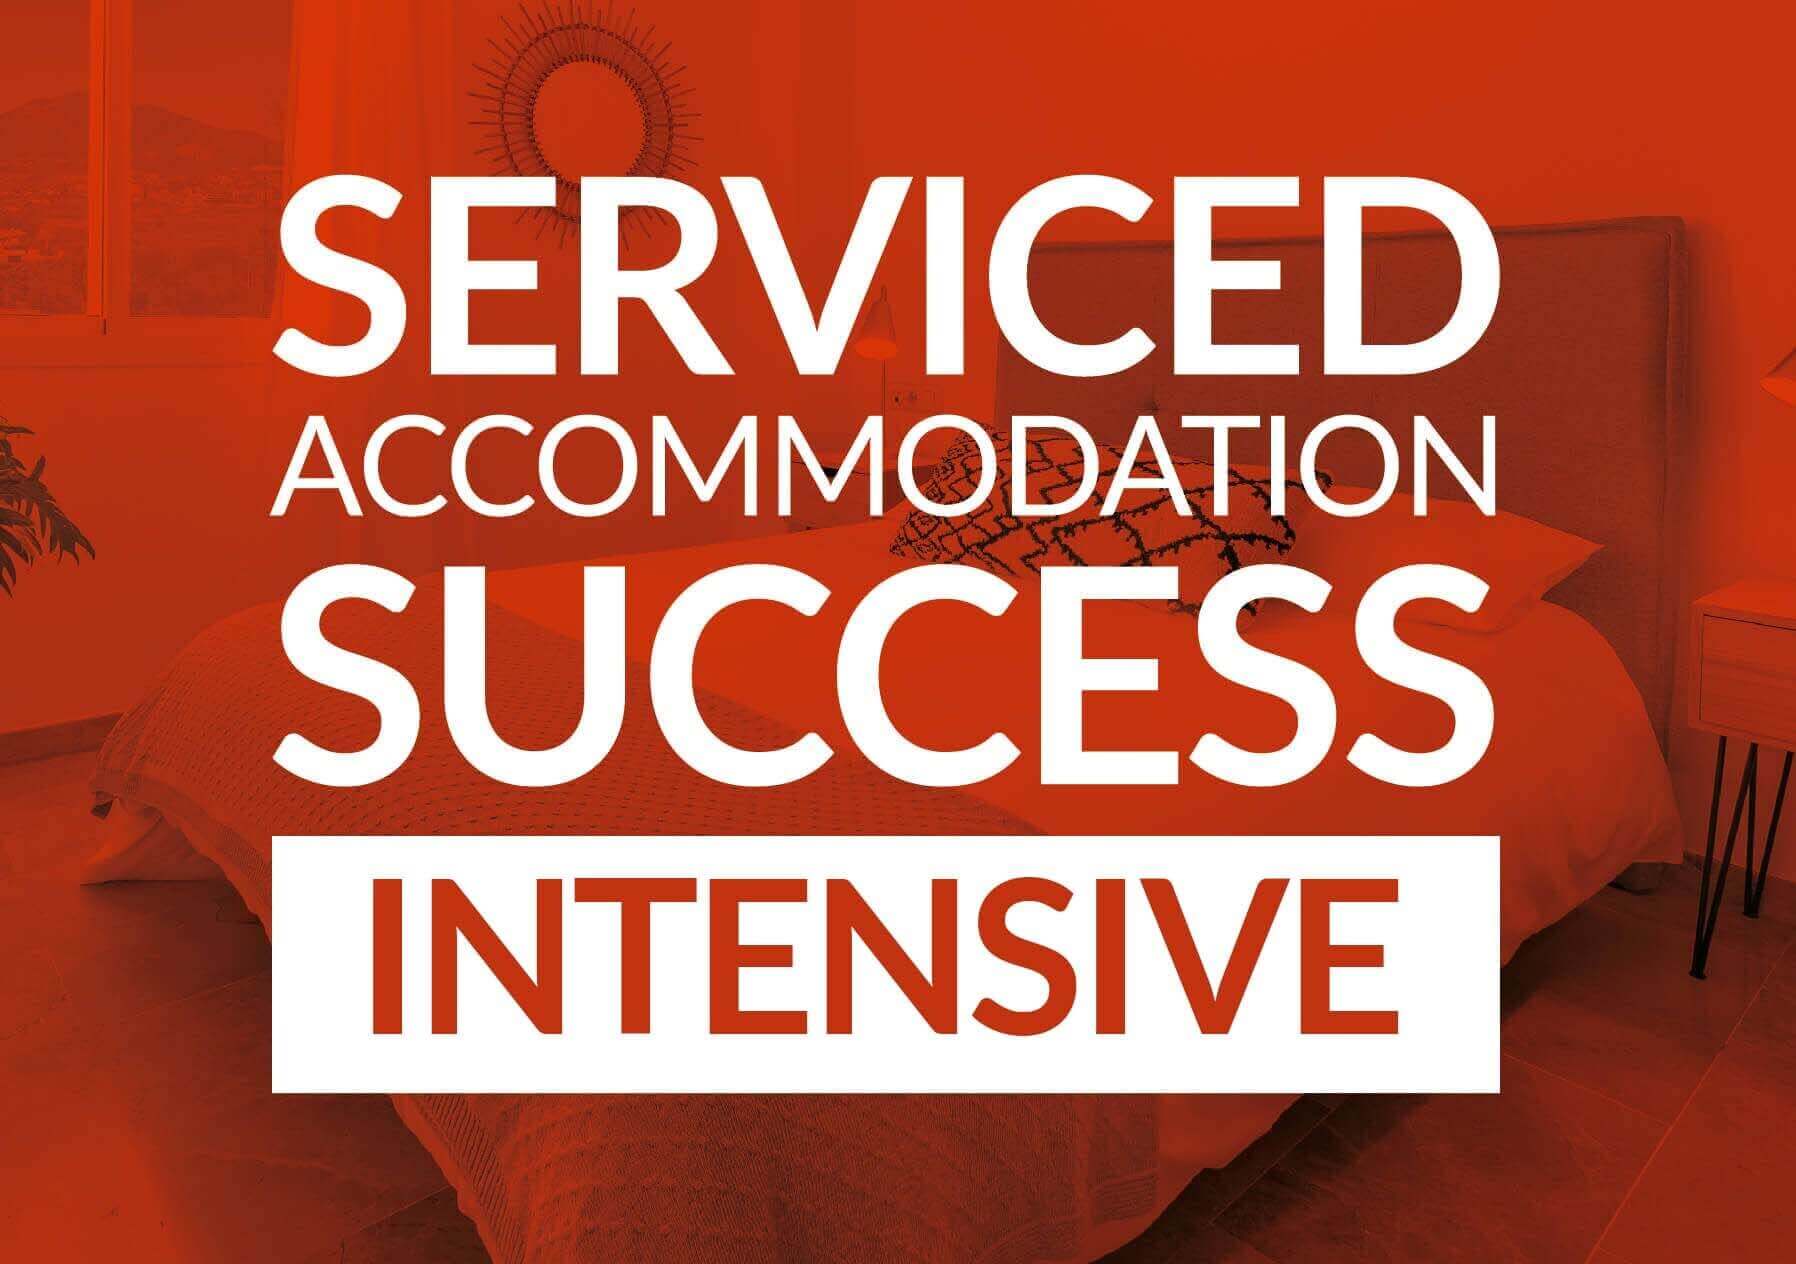 Serviced Accommodation Success intensive course